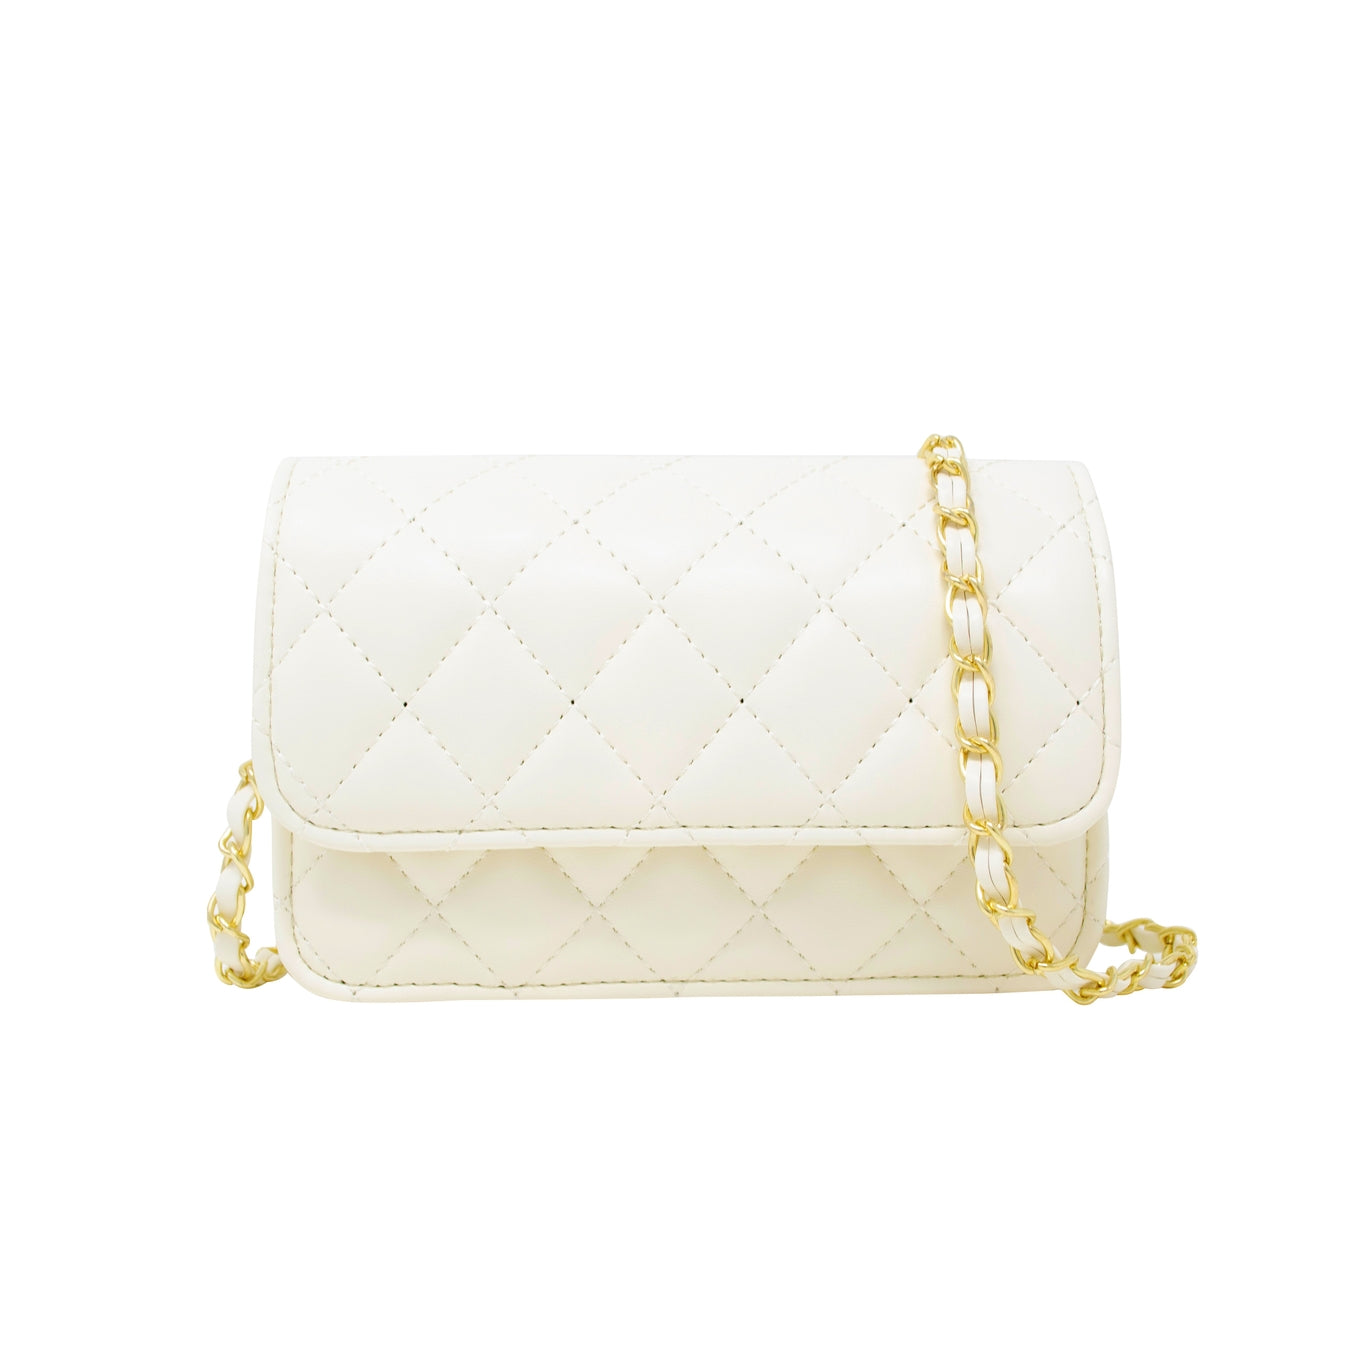 Tiny Treats classic quilted purse